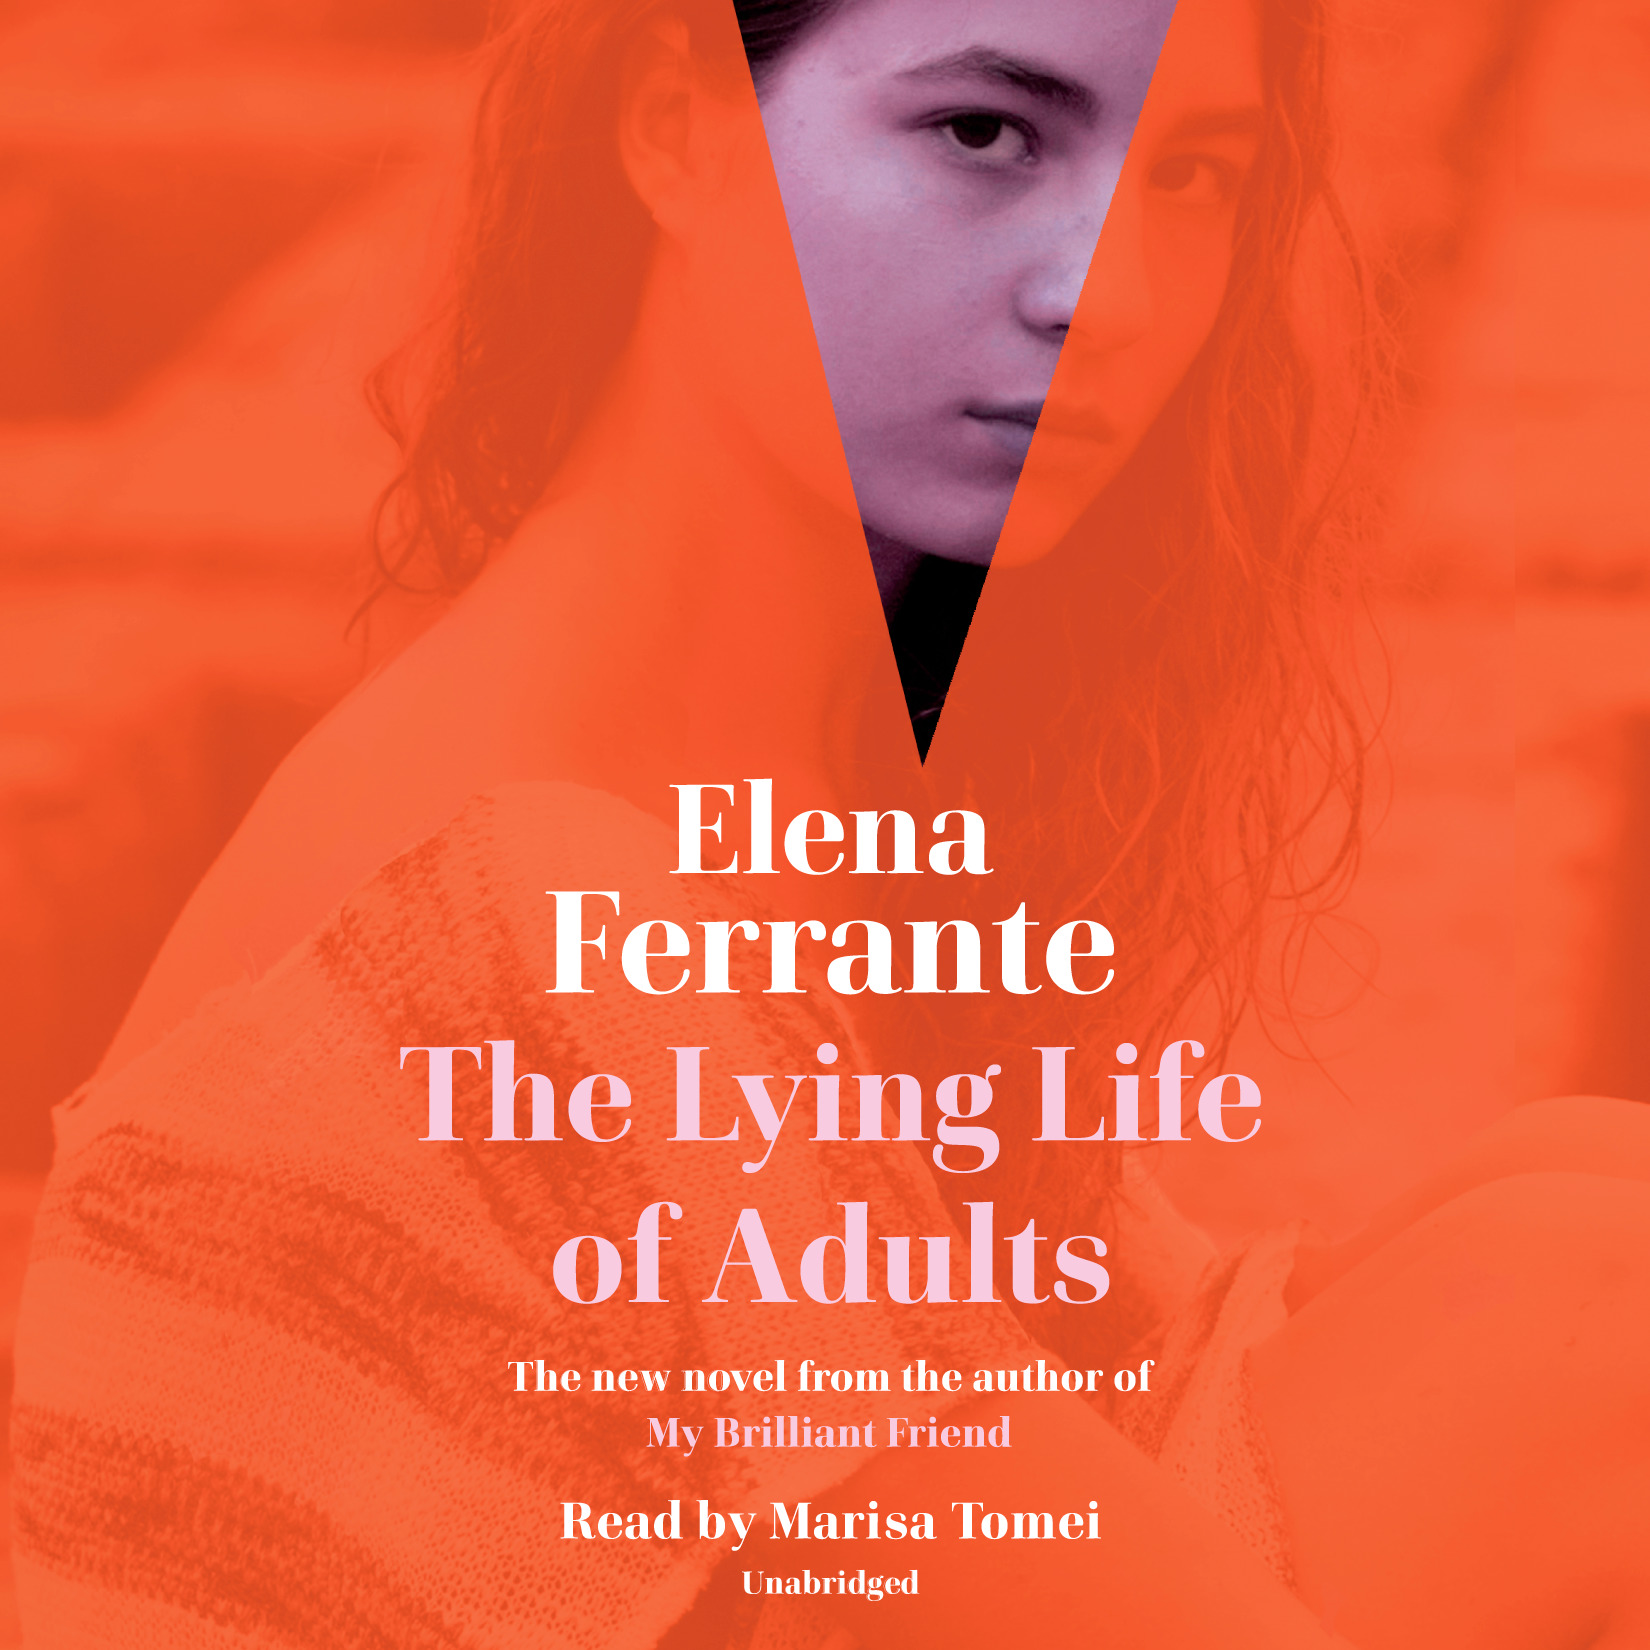 image for The Lying Life of Adults